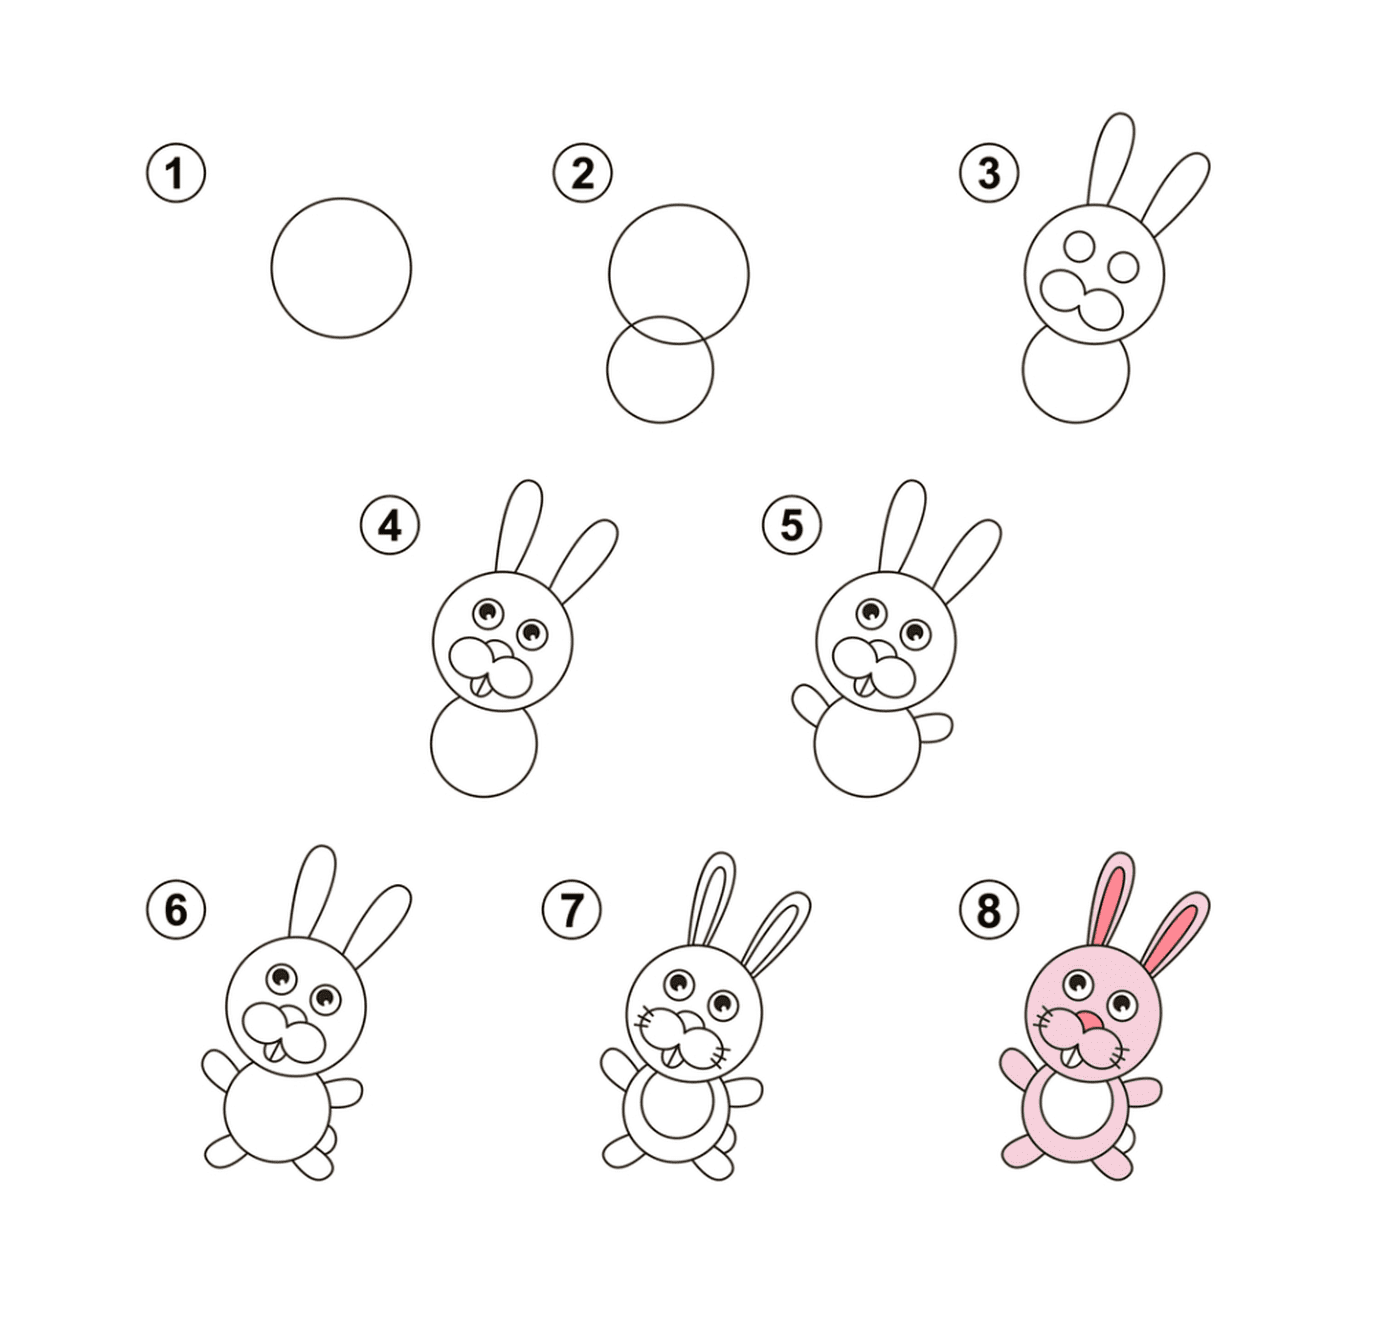  How to draw a rabbit 